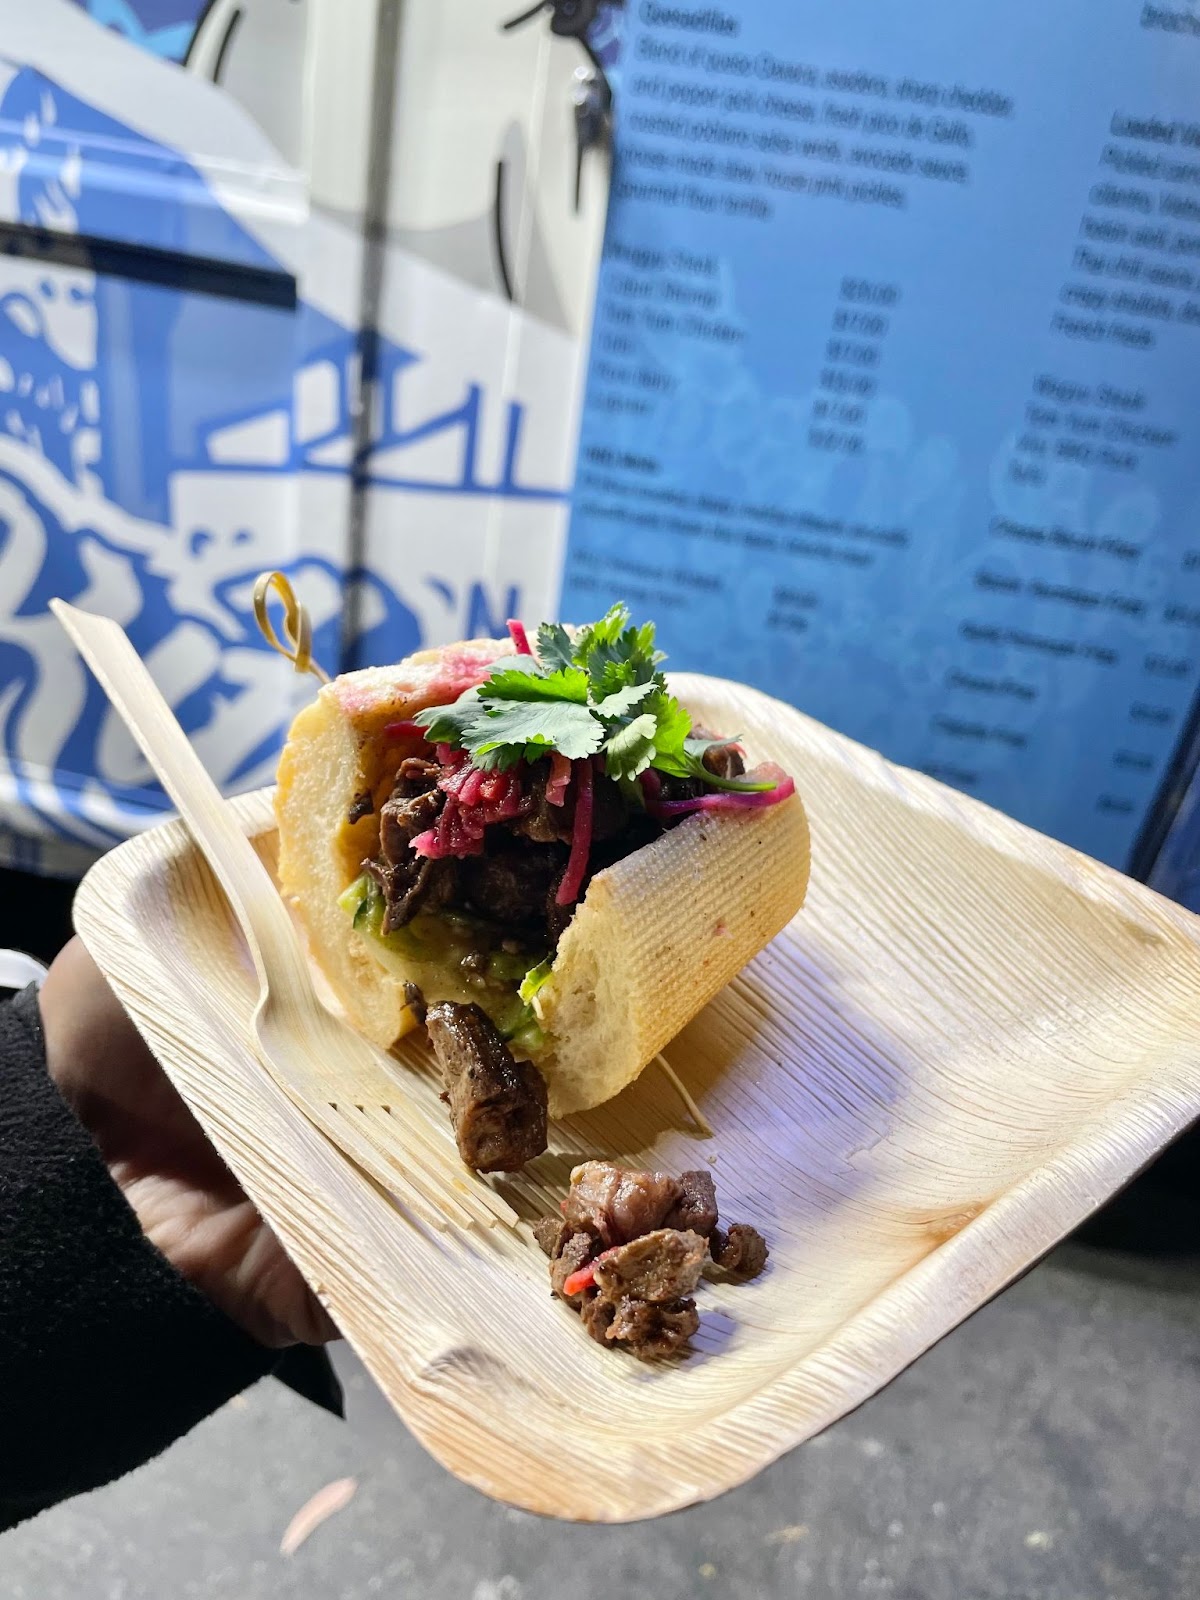 Masters of Taste 2023 will be West Side Banh Mi's first time at this event, serving delicious Vietnamese dishes from their pastel blue food truck.